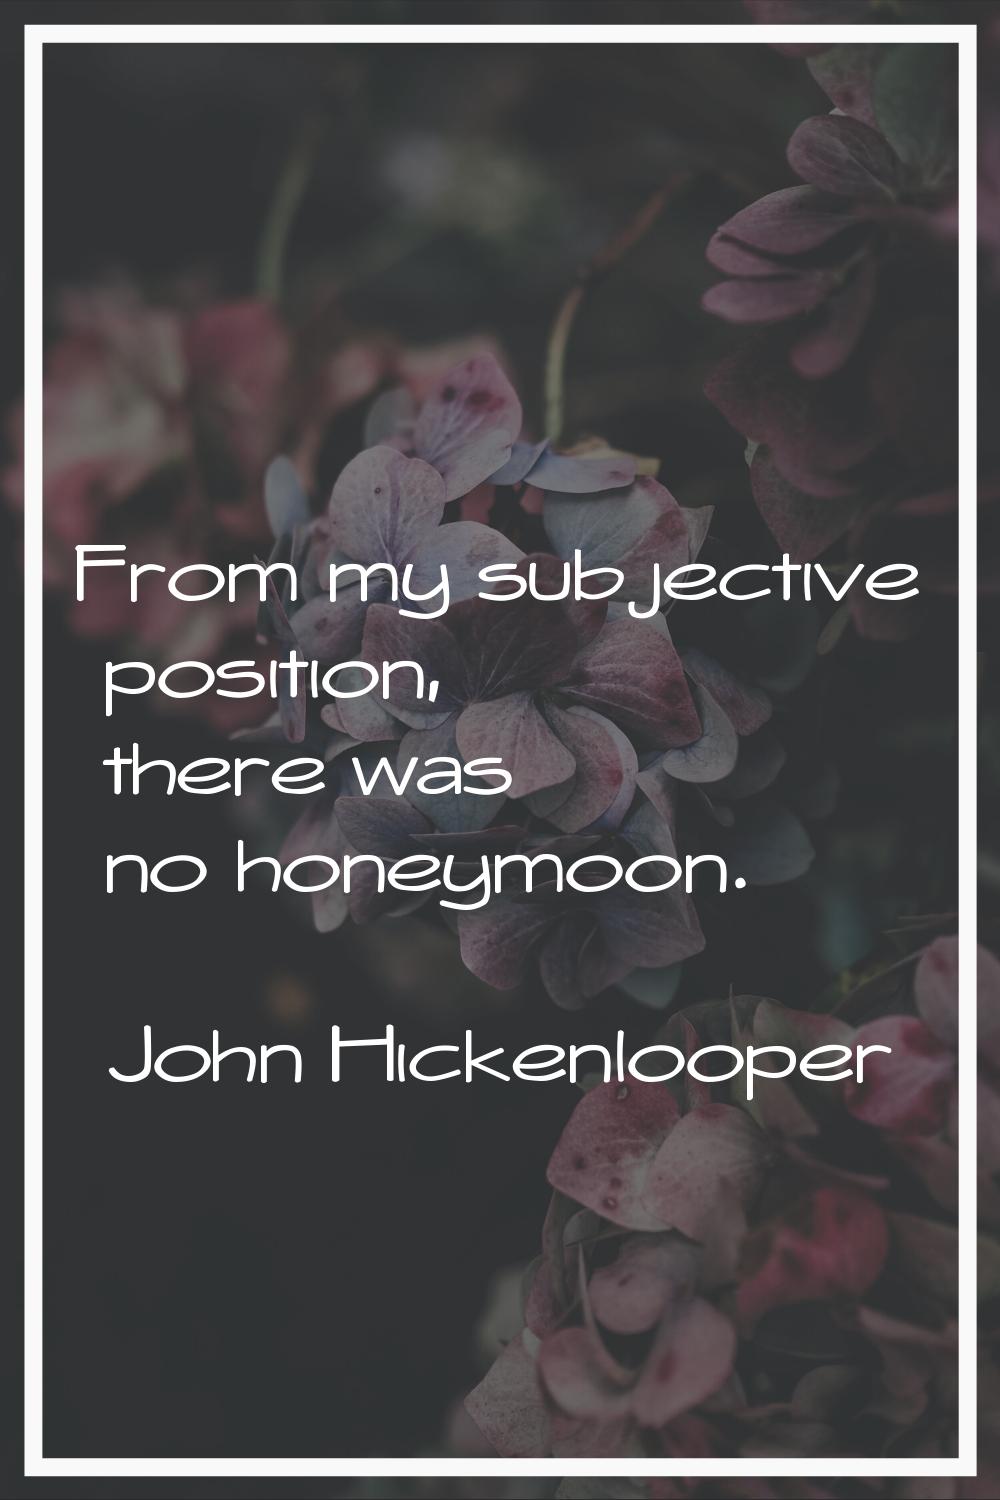 From my subjective position, there was no honeymoon.